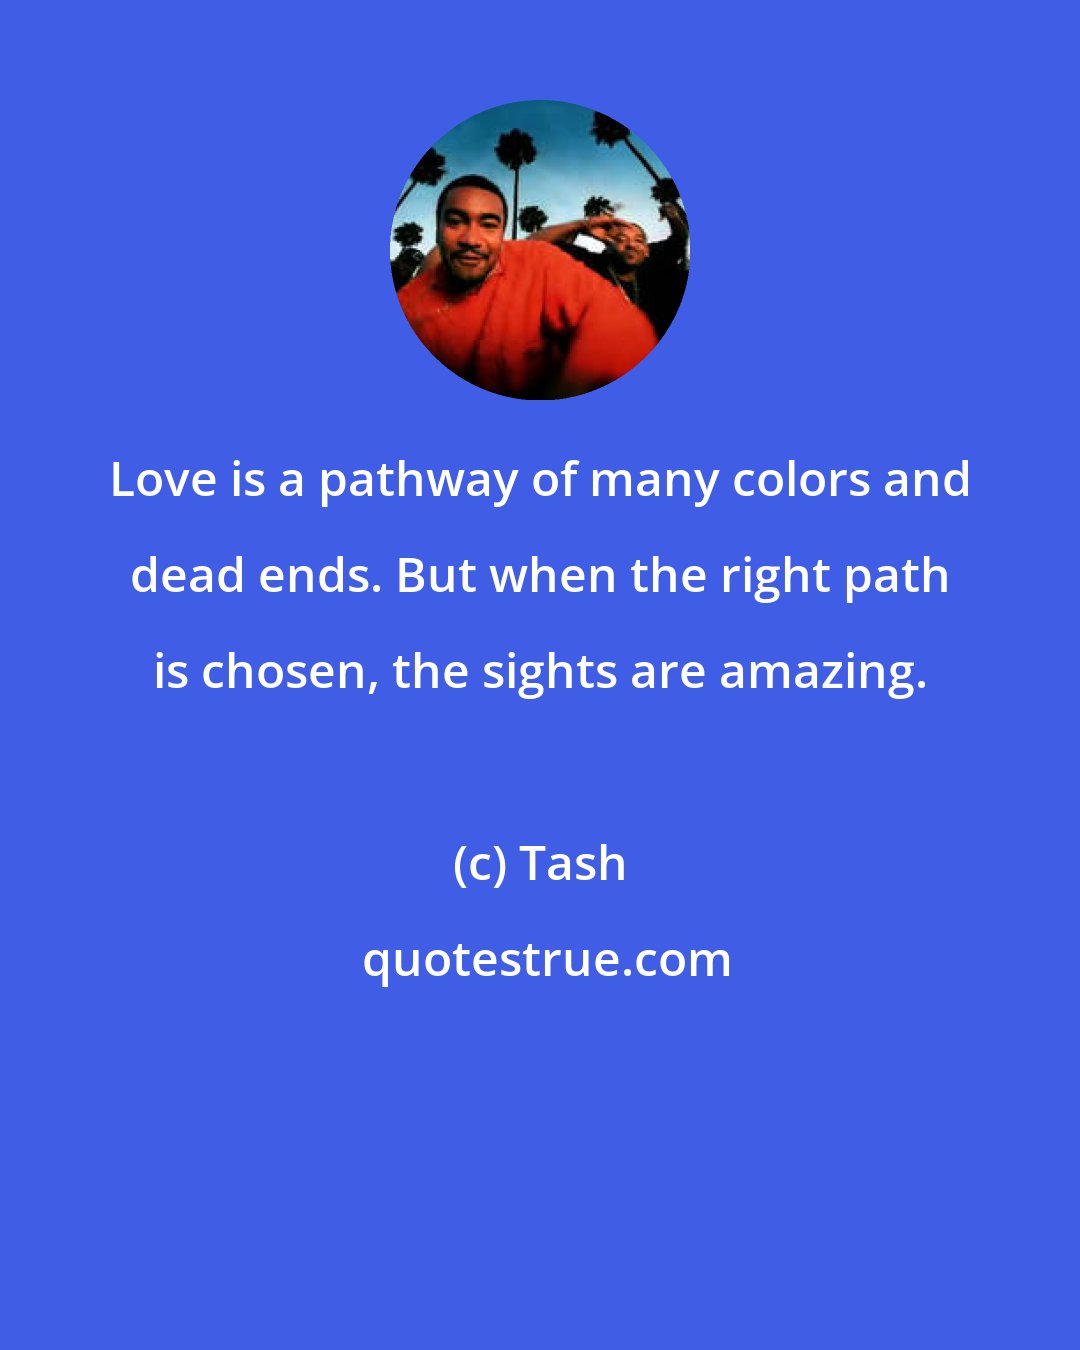 Tash: Love is a pathway of many colors and dead ends. But when the right path is chosen, the sights are amazing.